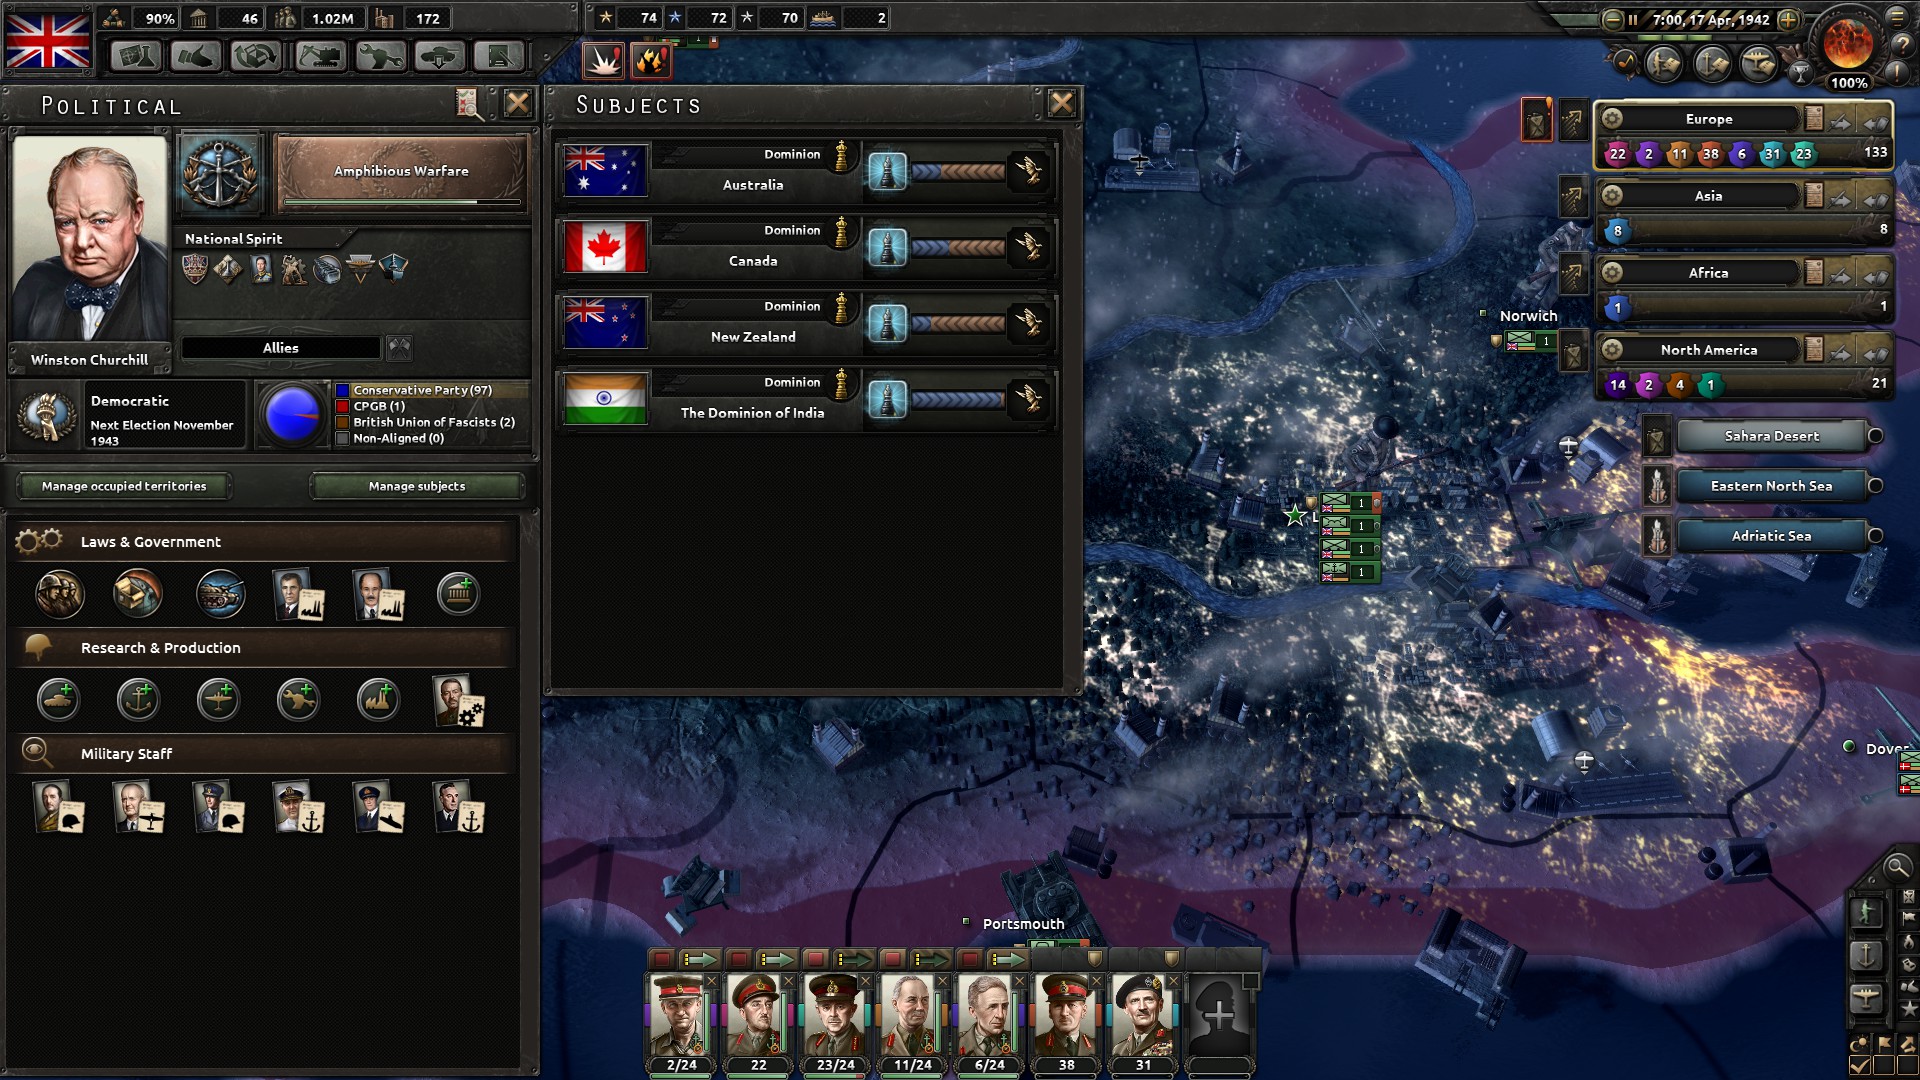 Expansion - Hearts of Iron IV: Together for Victory Featured Screenshot #1